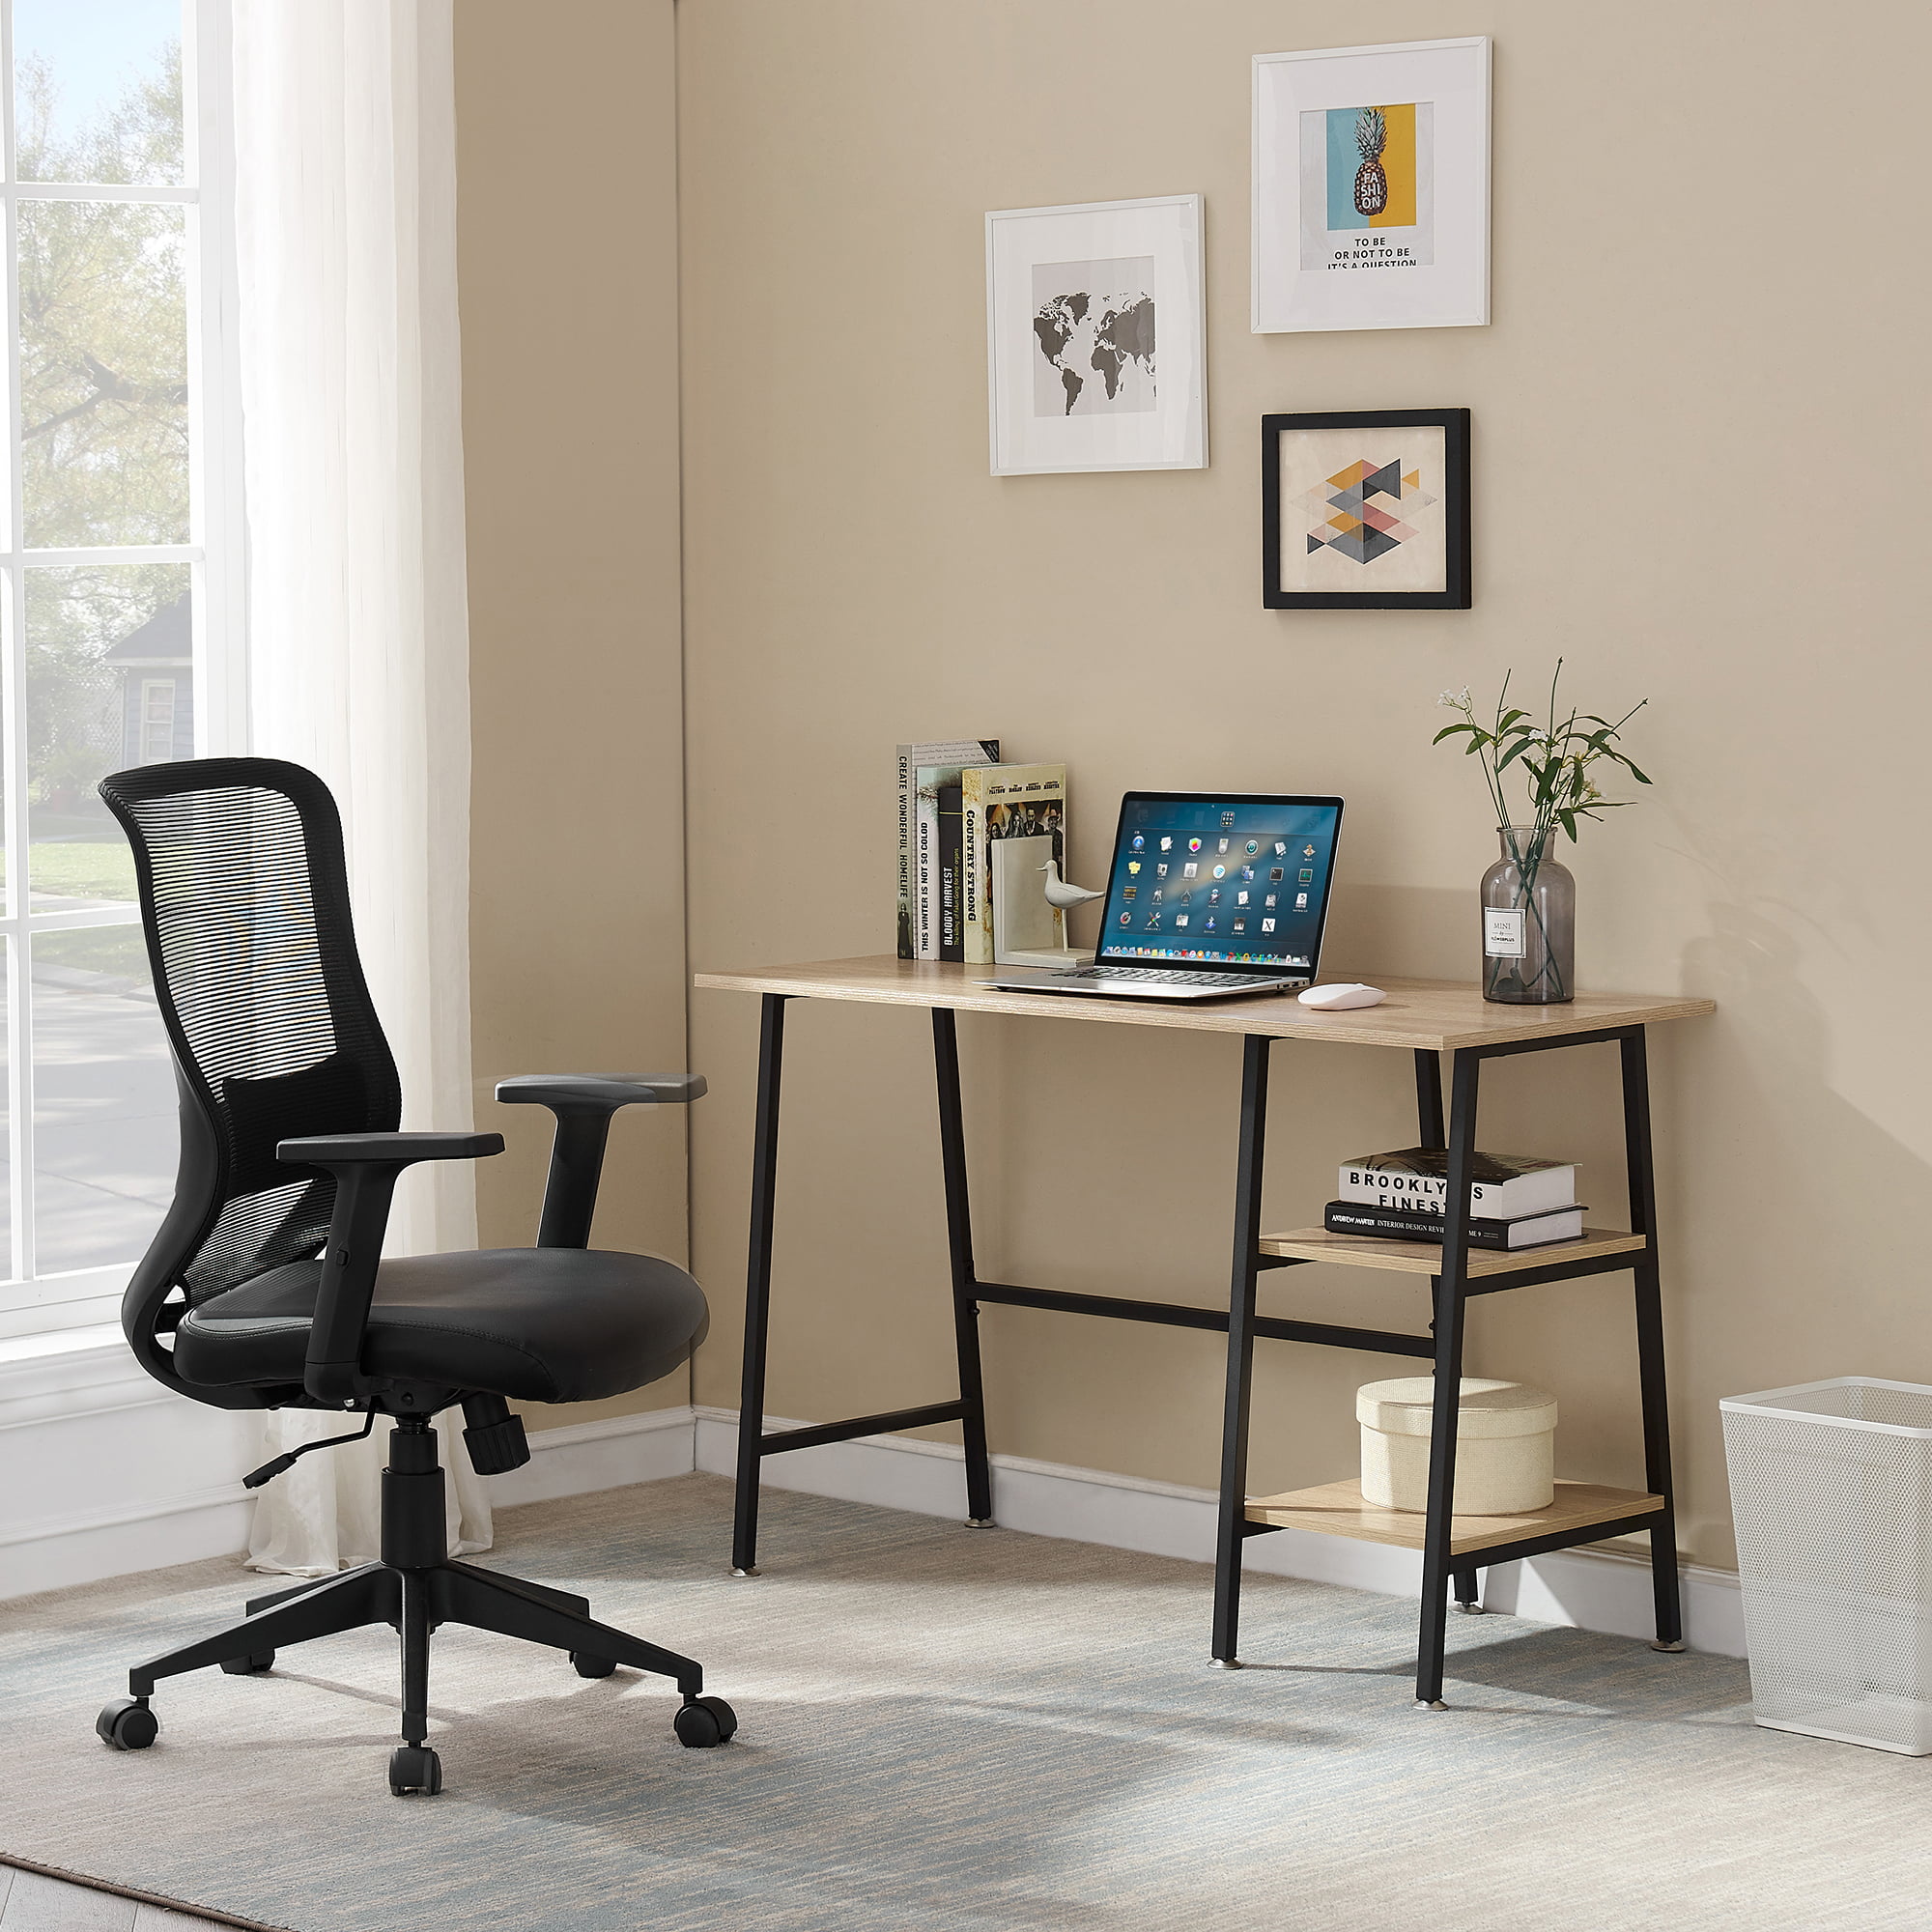 VECELO 2 Piece Home Office Computer Writing Desk with Adjustable Swivel Mesh Chair, Brown/Black